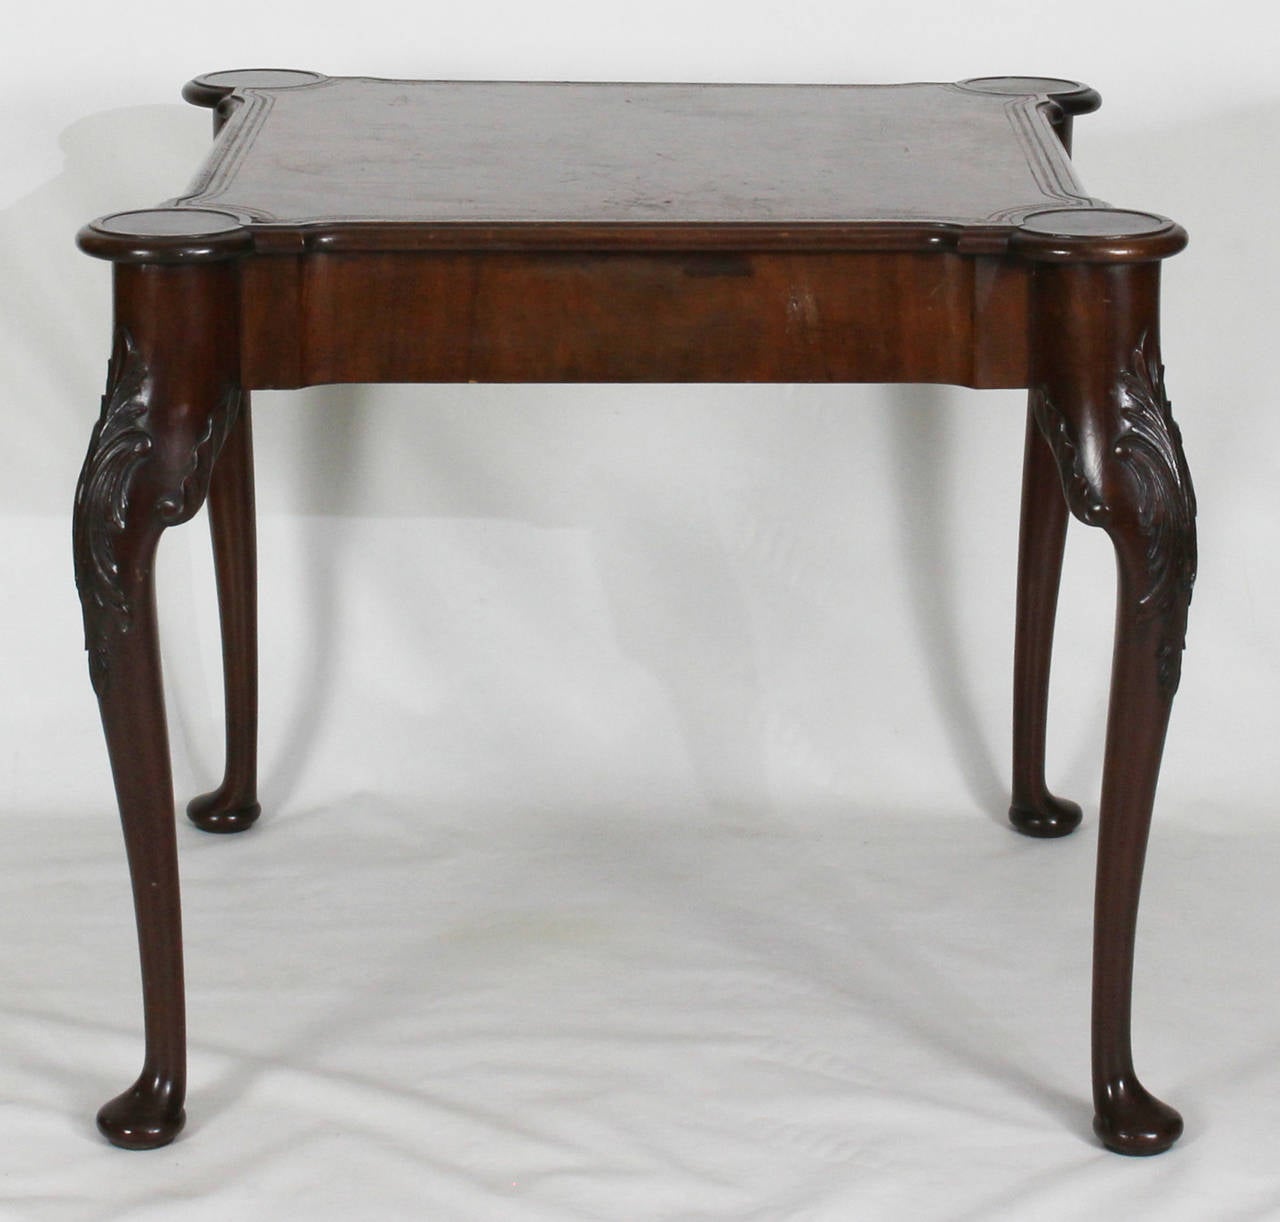 An early 20th century mahogany Georgian style card table with inset tooled leather top on cabriole legs and pad feet.